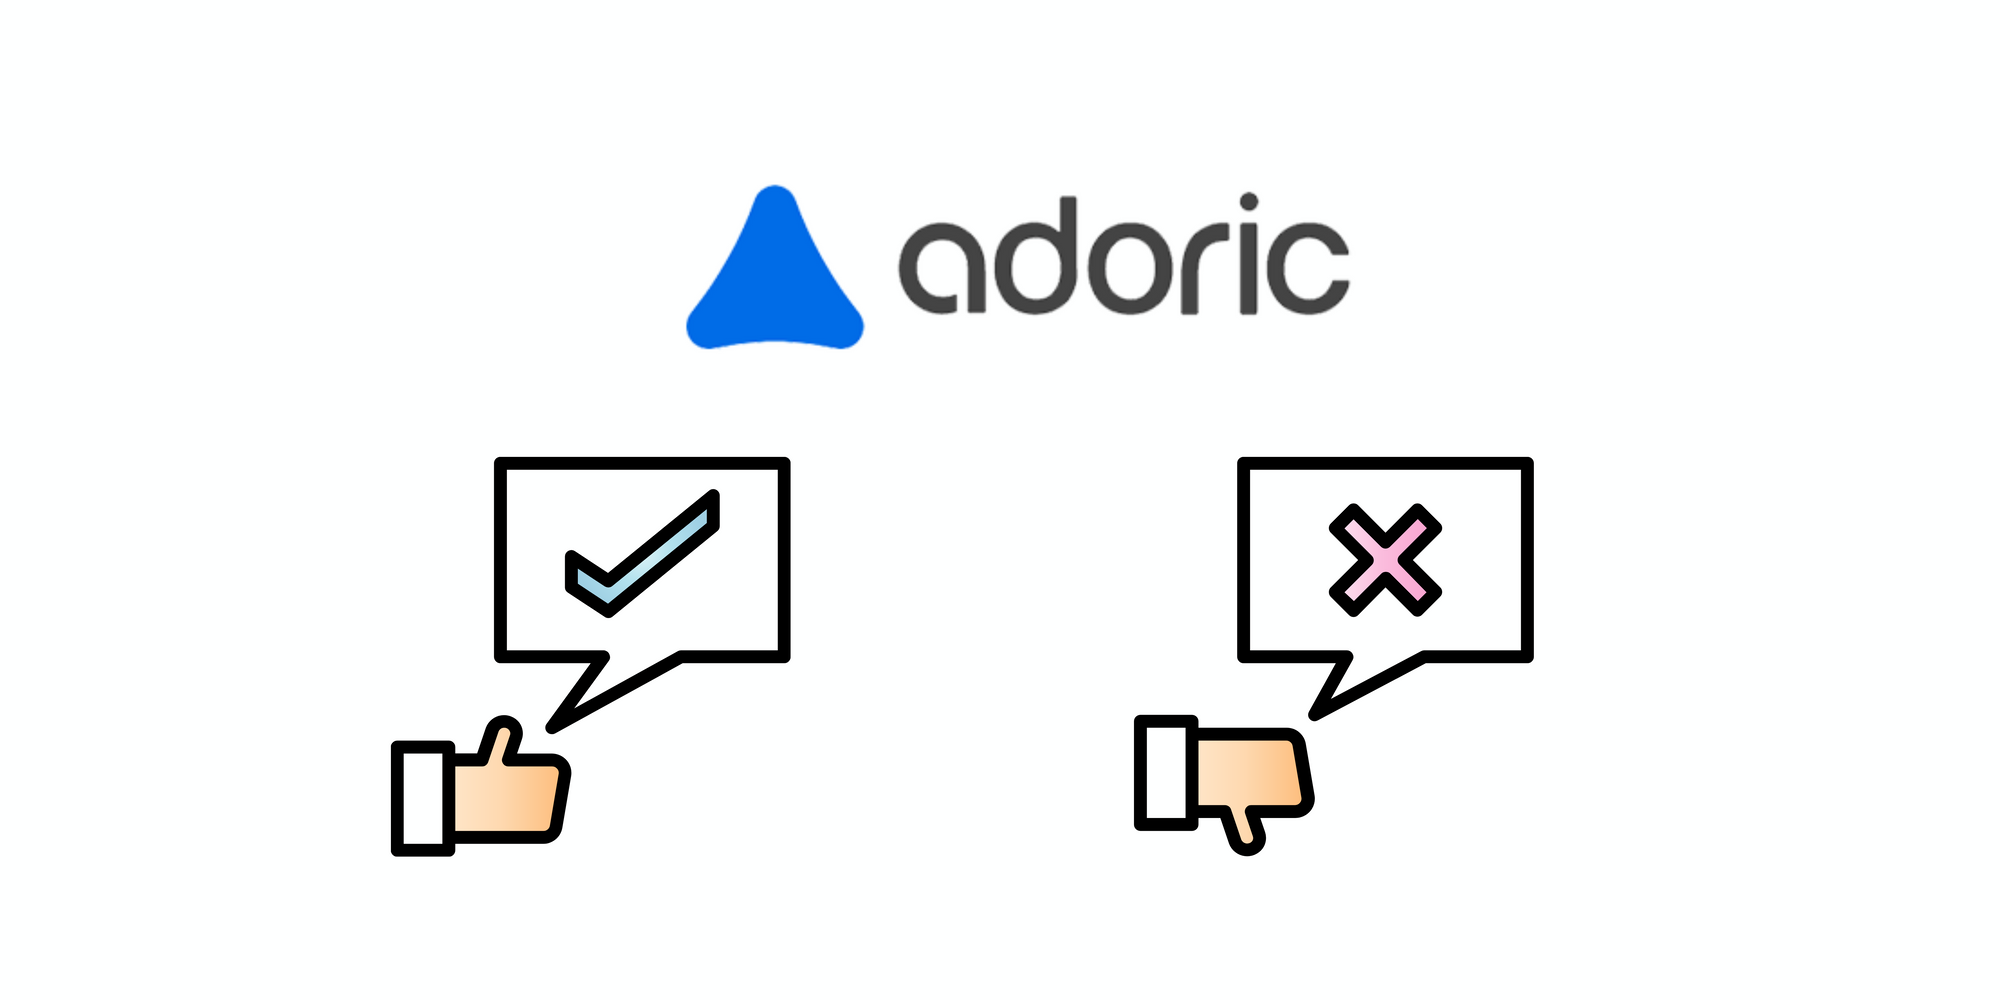 Adoric icon, check and x icons with thumbs-up & thumbs-down on white background to talk about the pros and cons